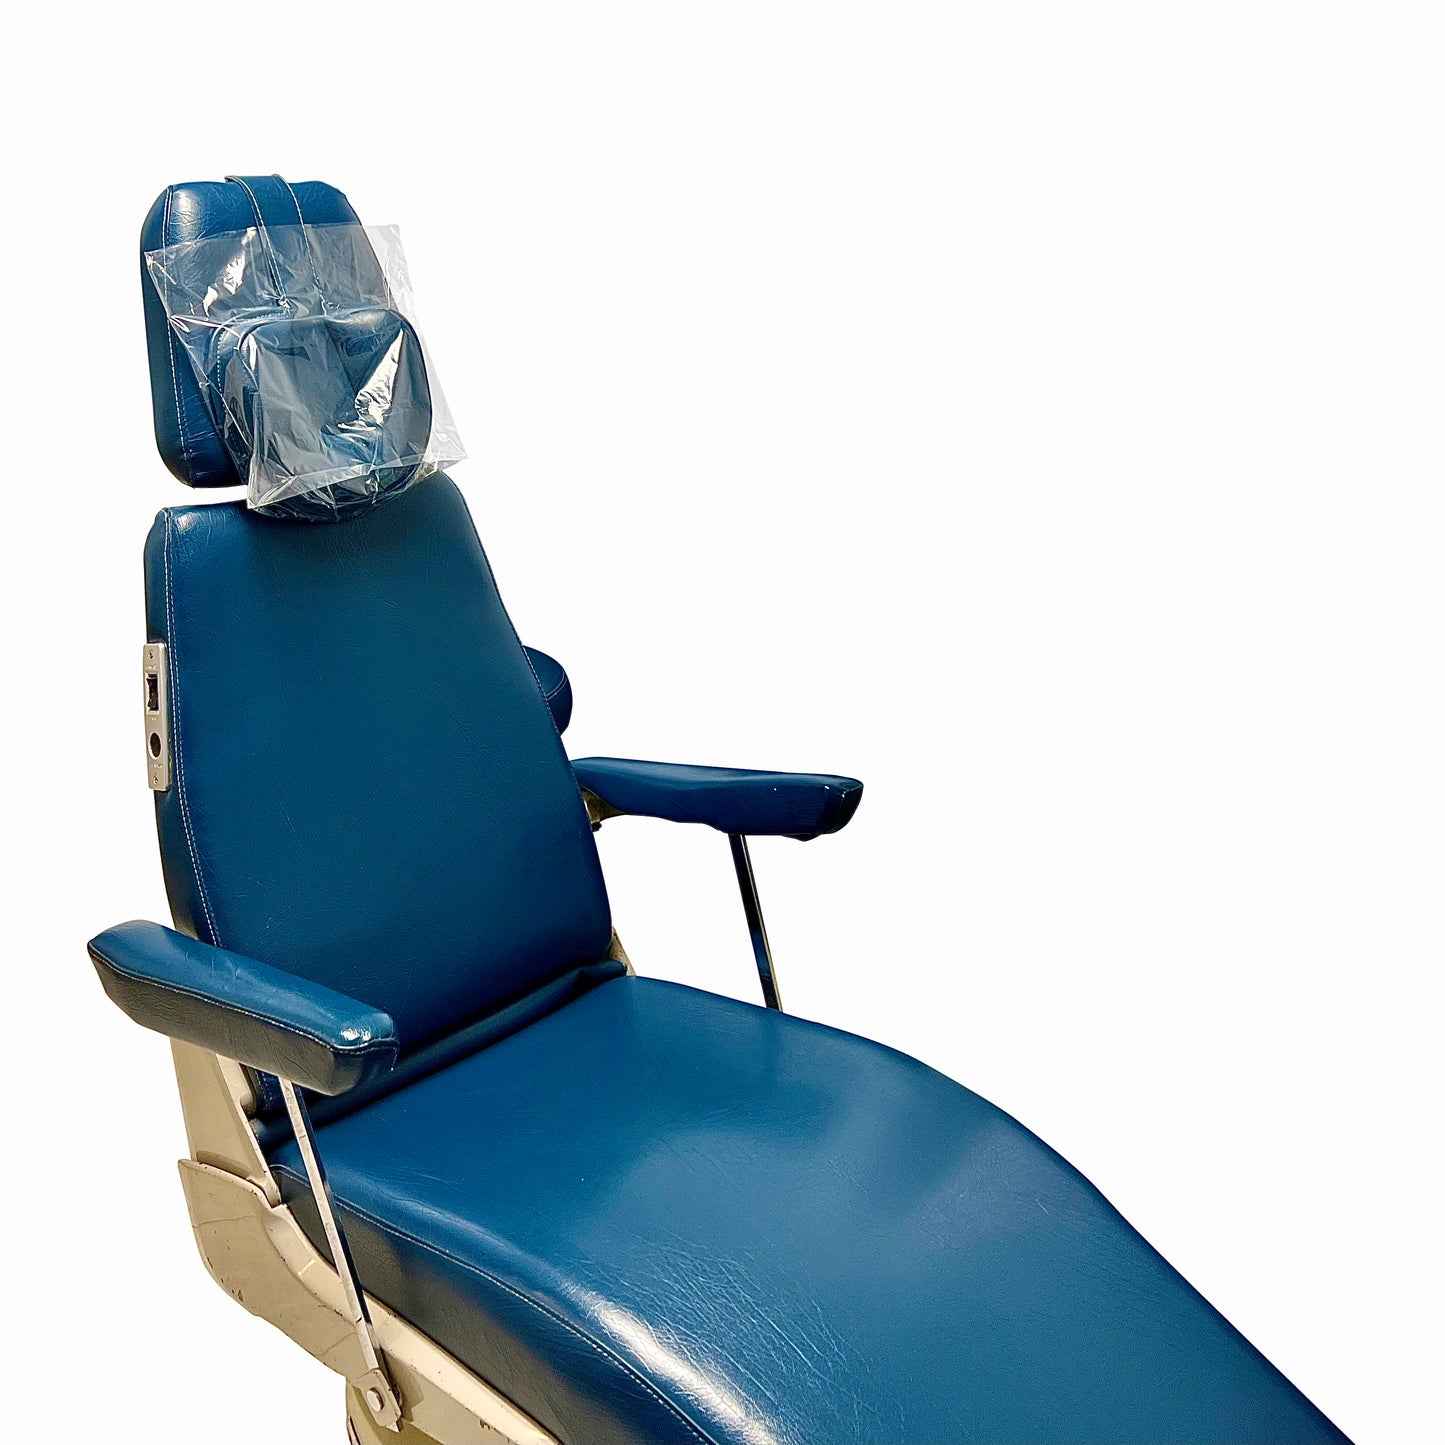 Disposable Clear Plastic Chair Cover, Head Rest Cover, Waterproof Plastic Covers for Dental Chairs, Tattoo Chair (Plastic Head Rest Sleeve (250 pcs/Box)